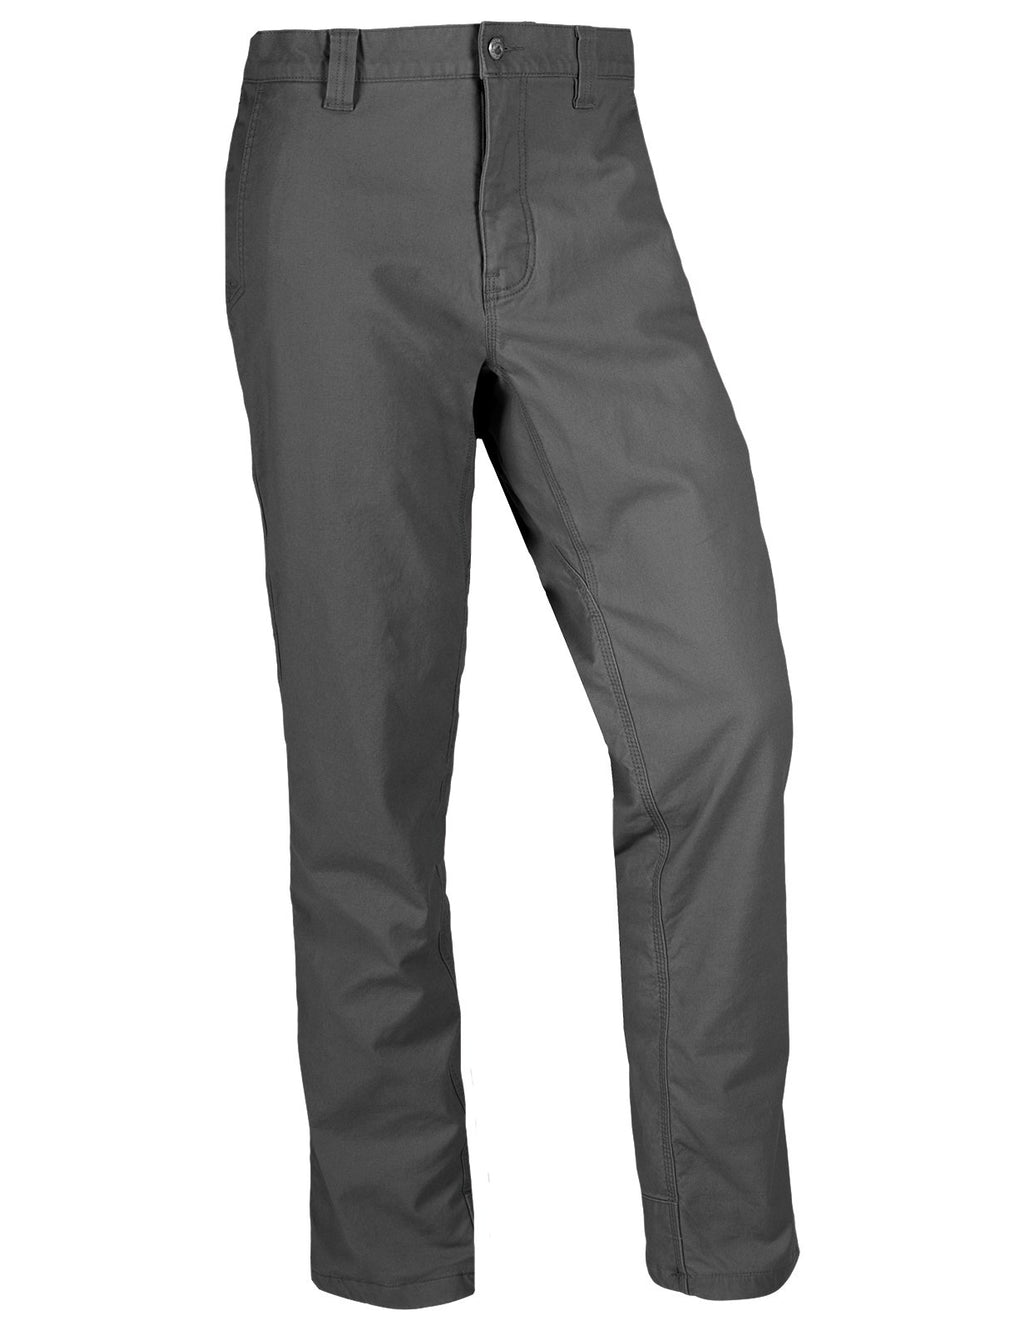 Lined Mountain Pant